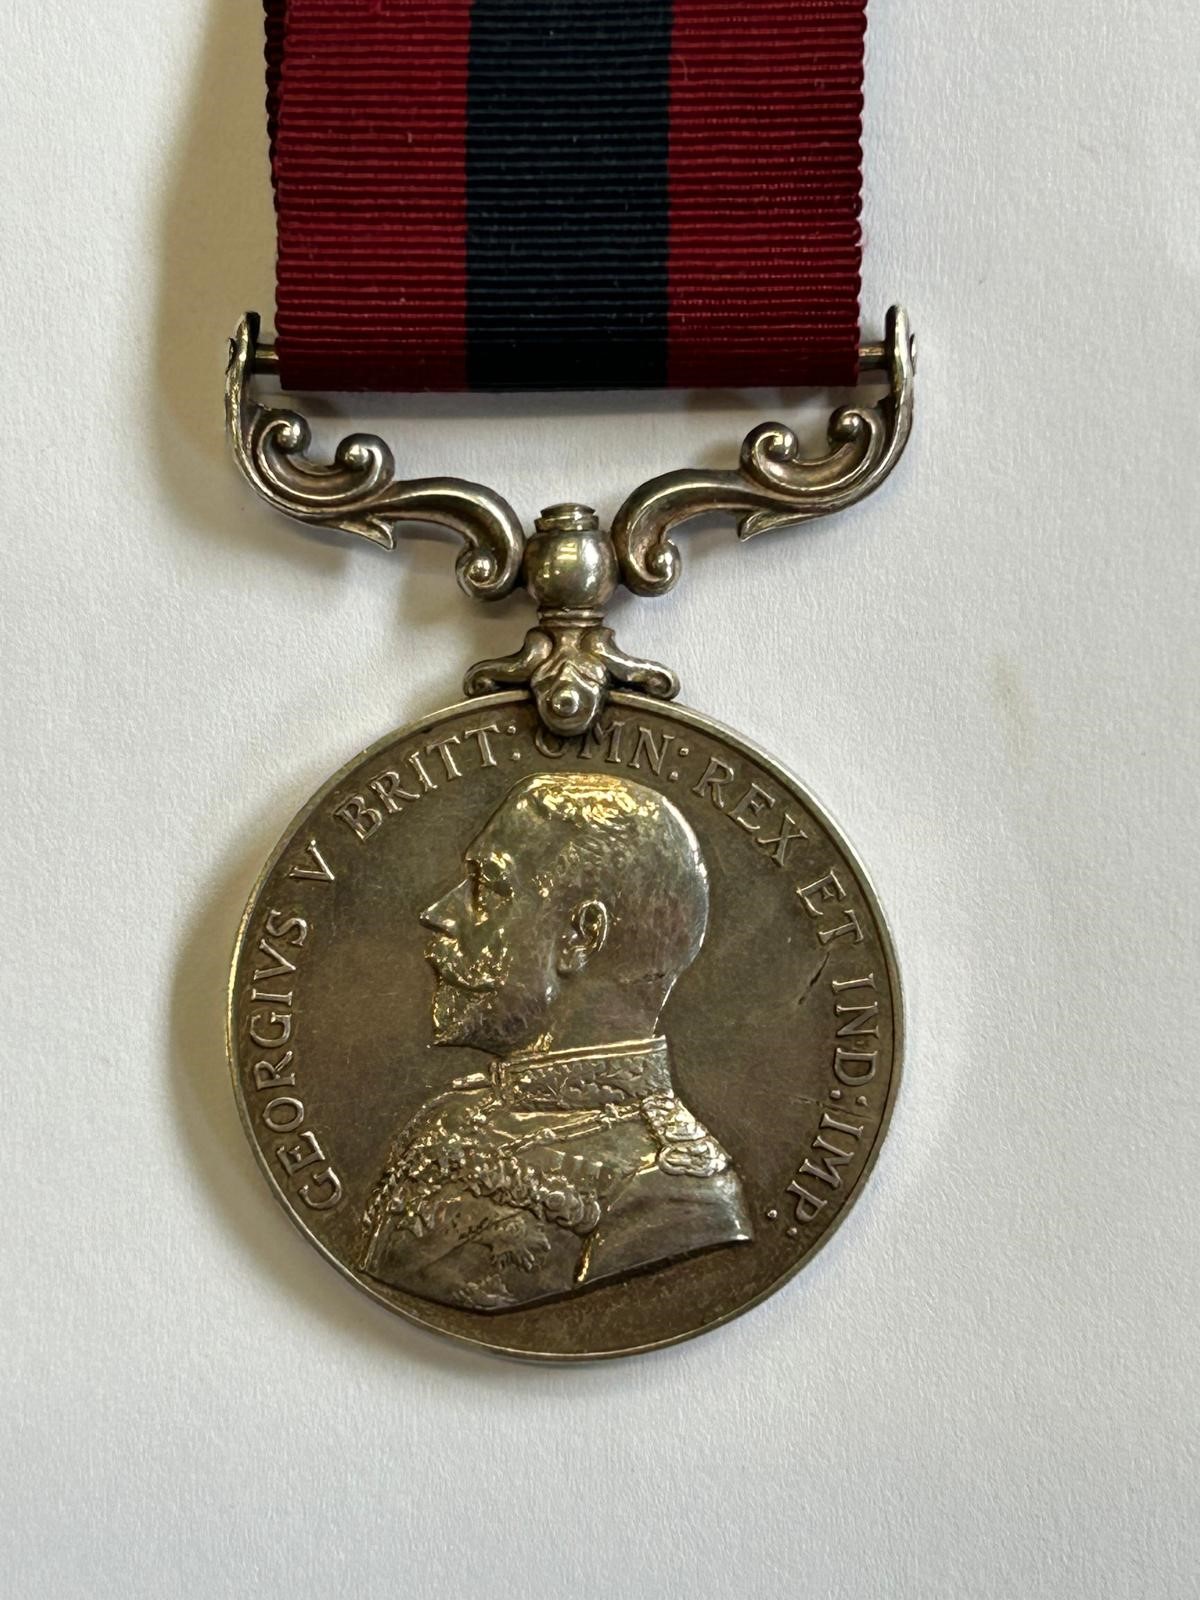 A Distinguished Conduct Medal